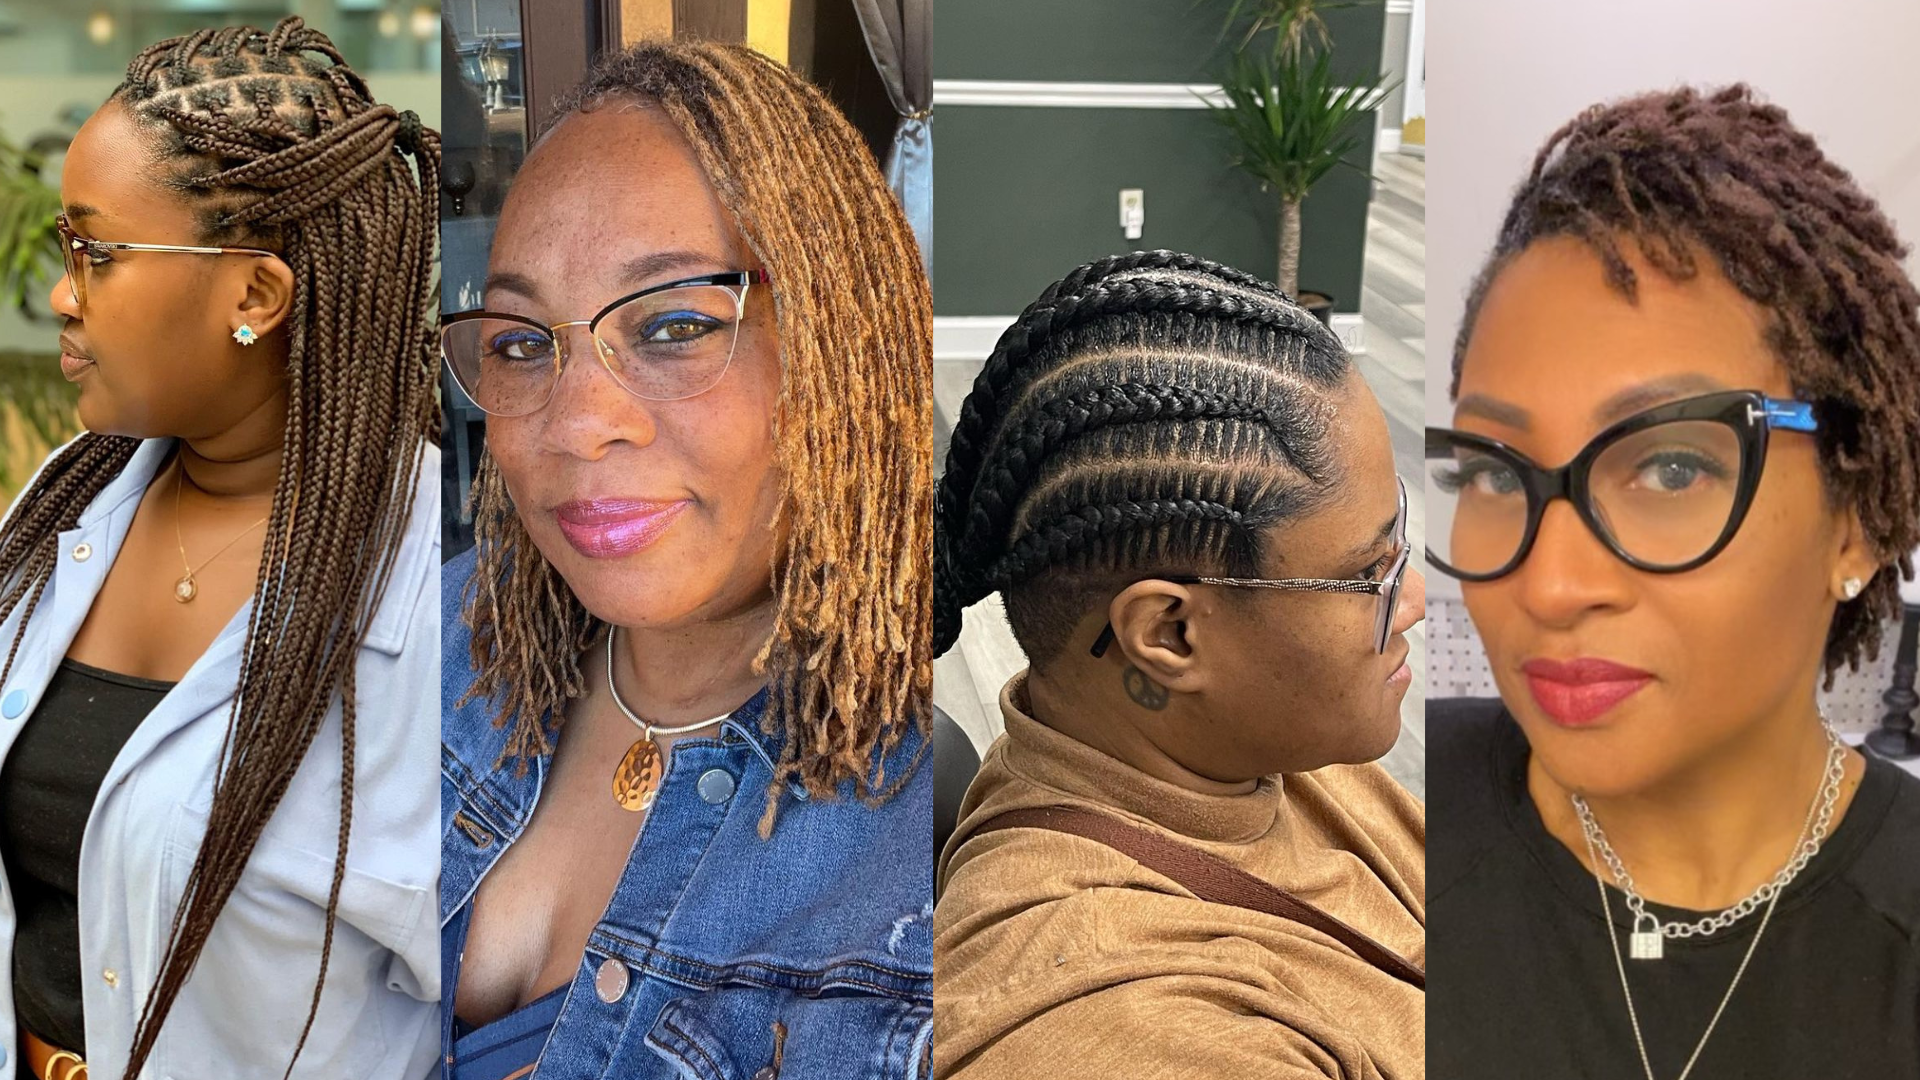 36 Most Ideal Hairstyles for Women Over 60 with Glasses